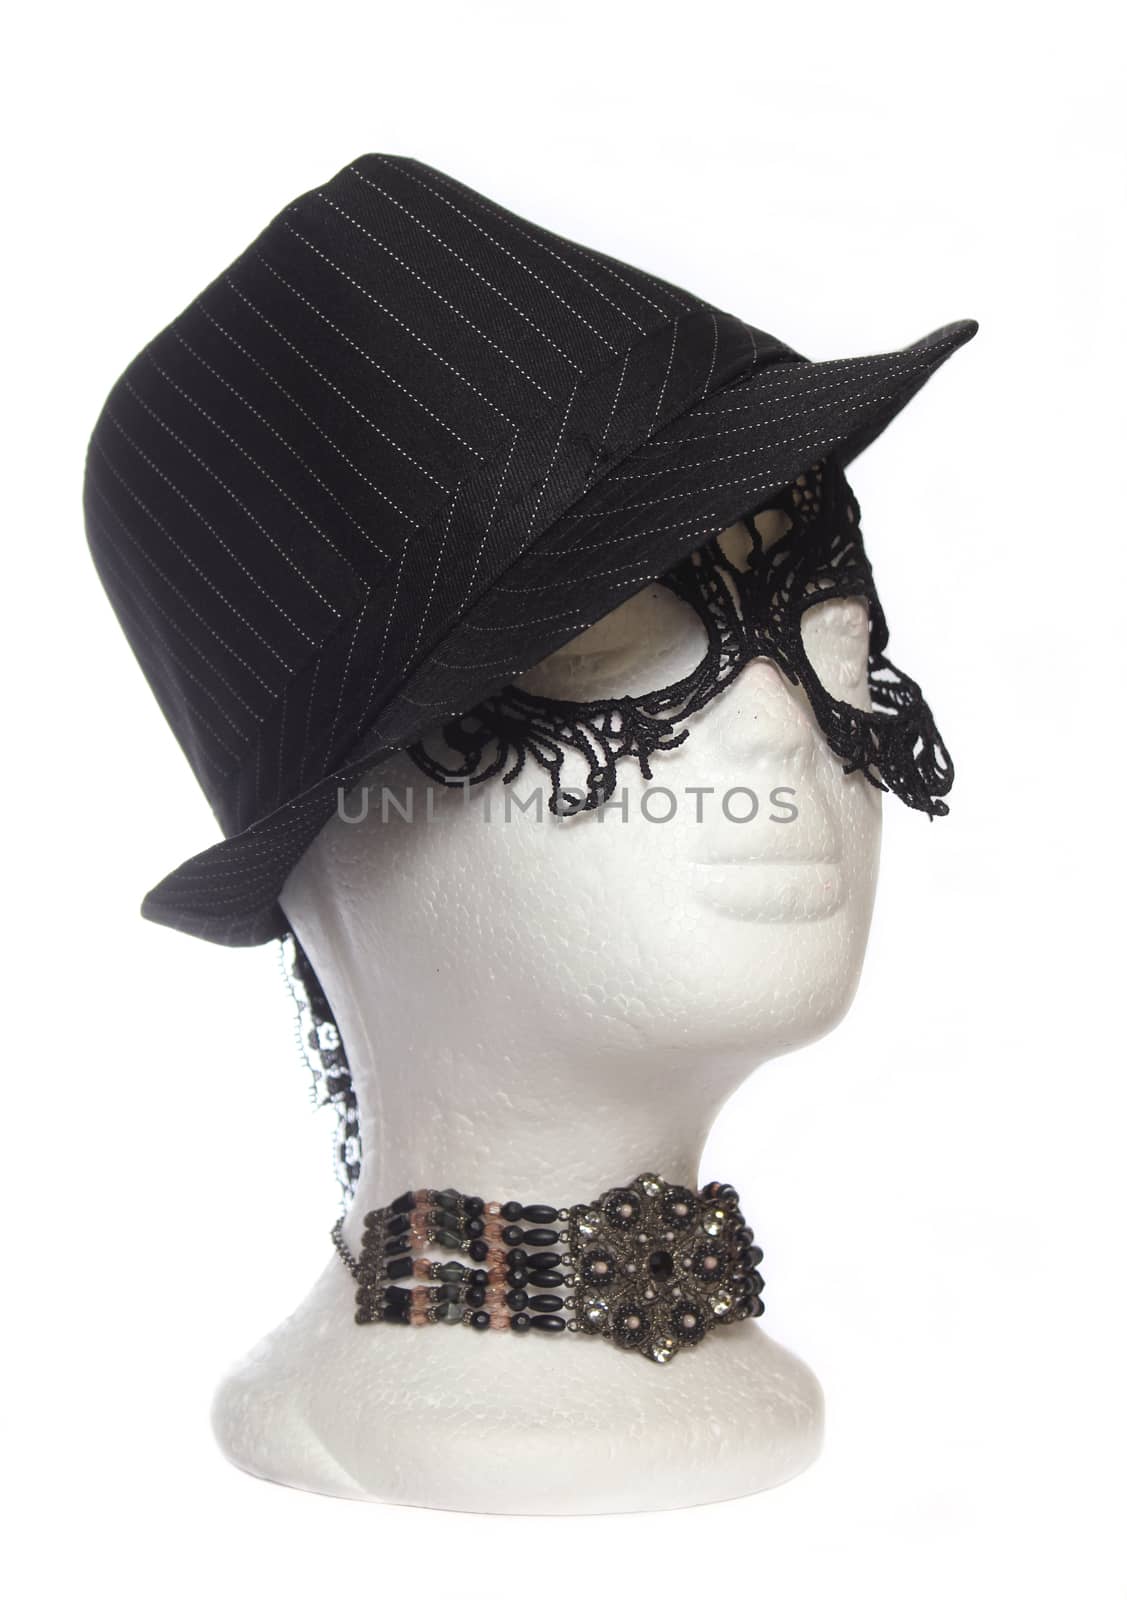 Fedora and Lace Mask on Mannequin Head With Antique Choker by Marti157900